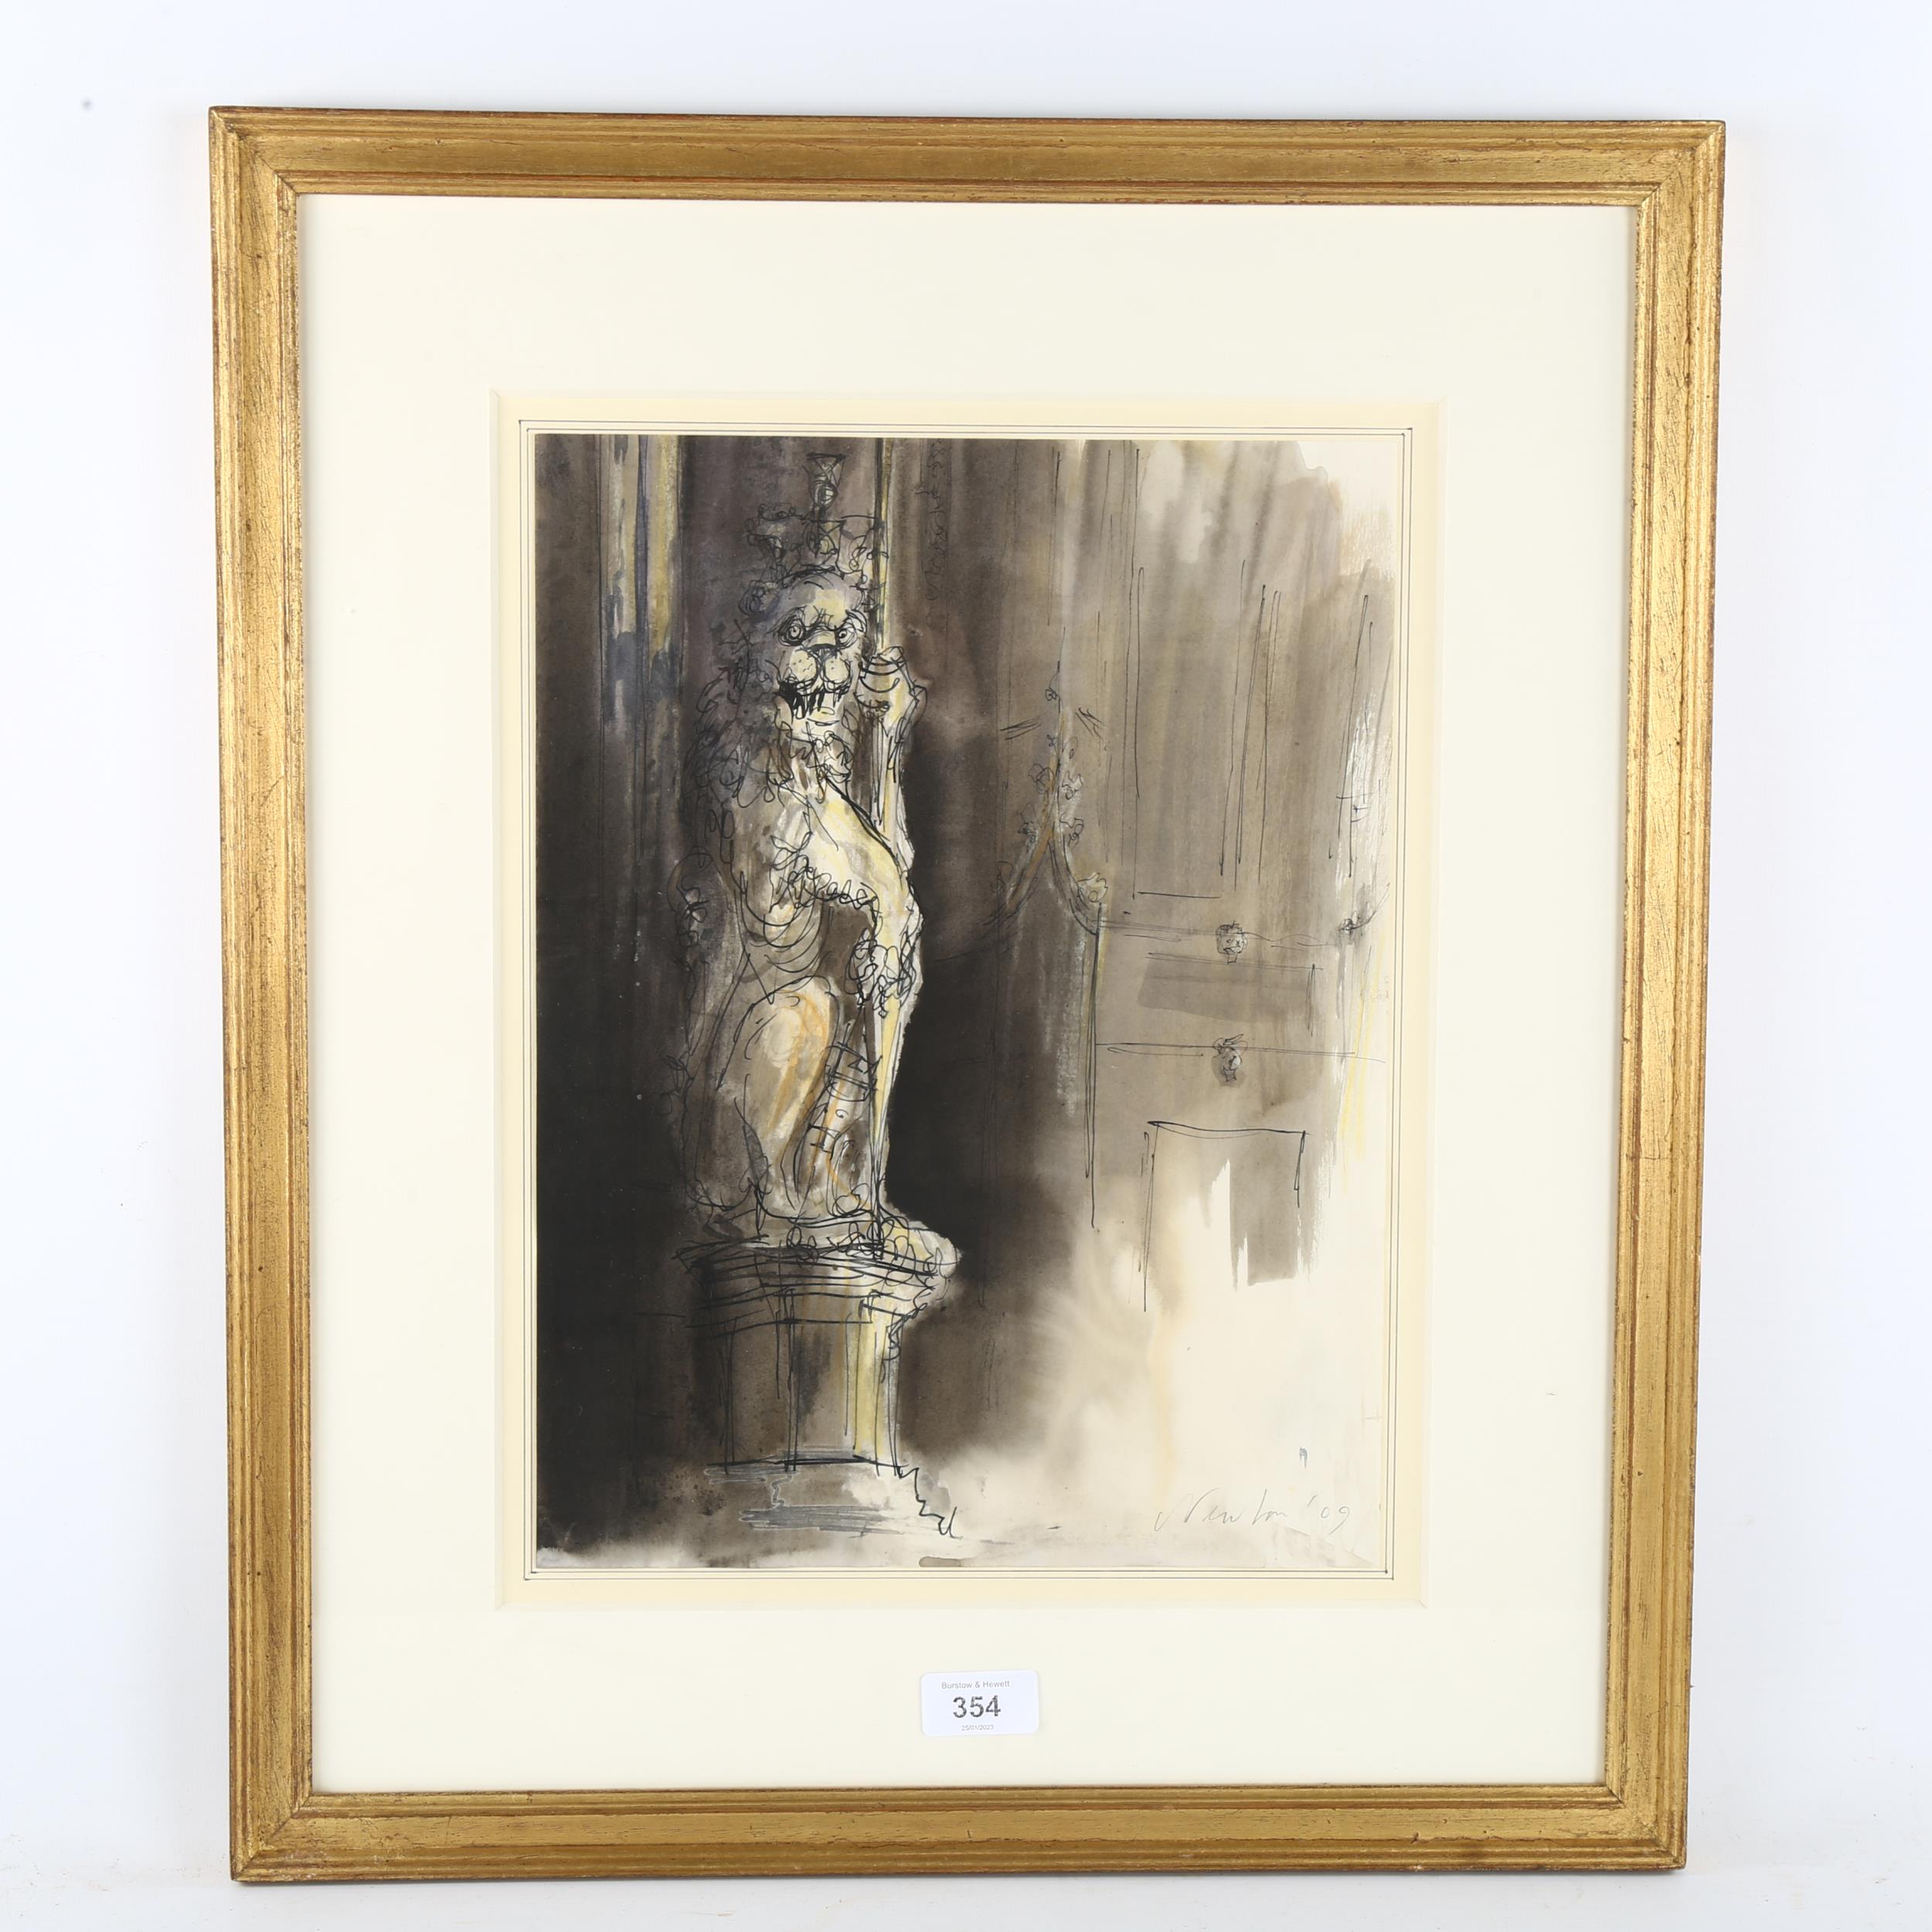 Trevor Newton, heraldic lion statue, watercolour/ink, signed and dated '09, 37cm x 27cm, framed - Image 2 of 4